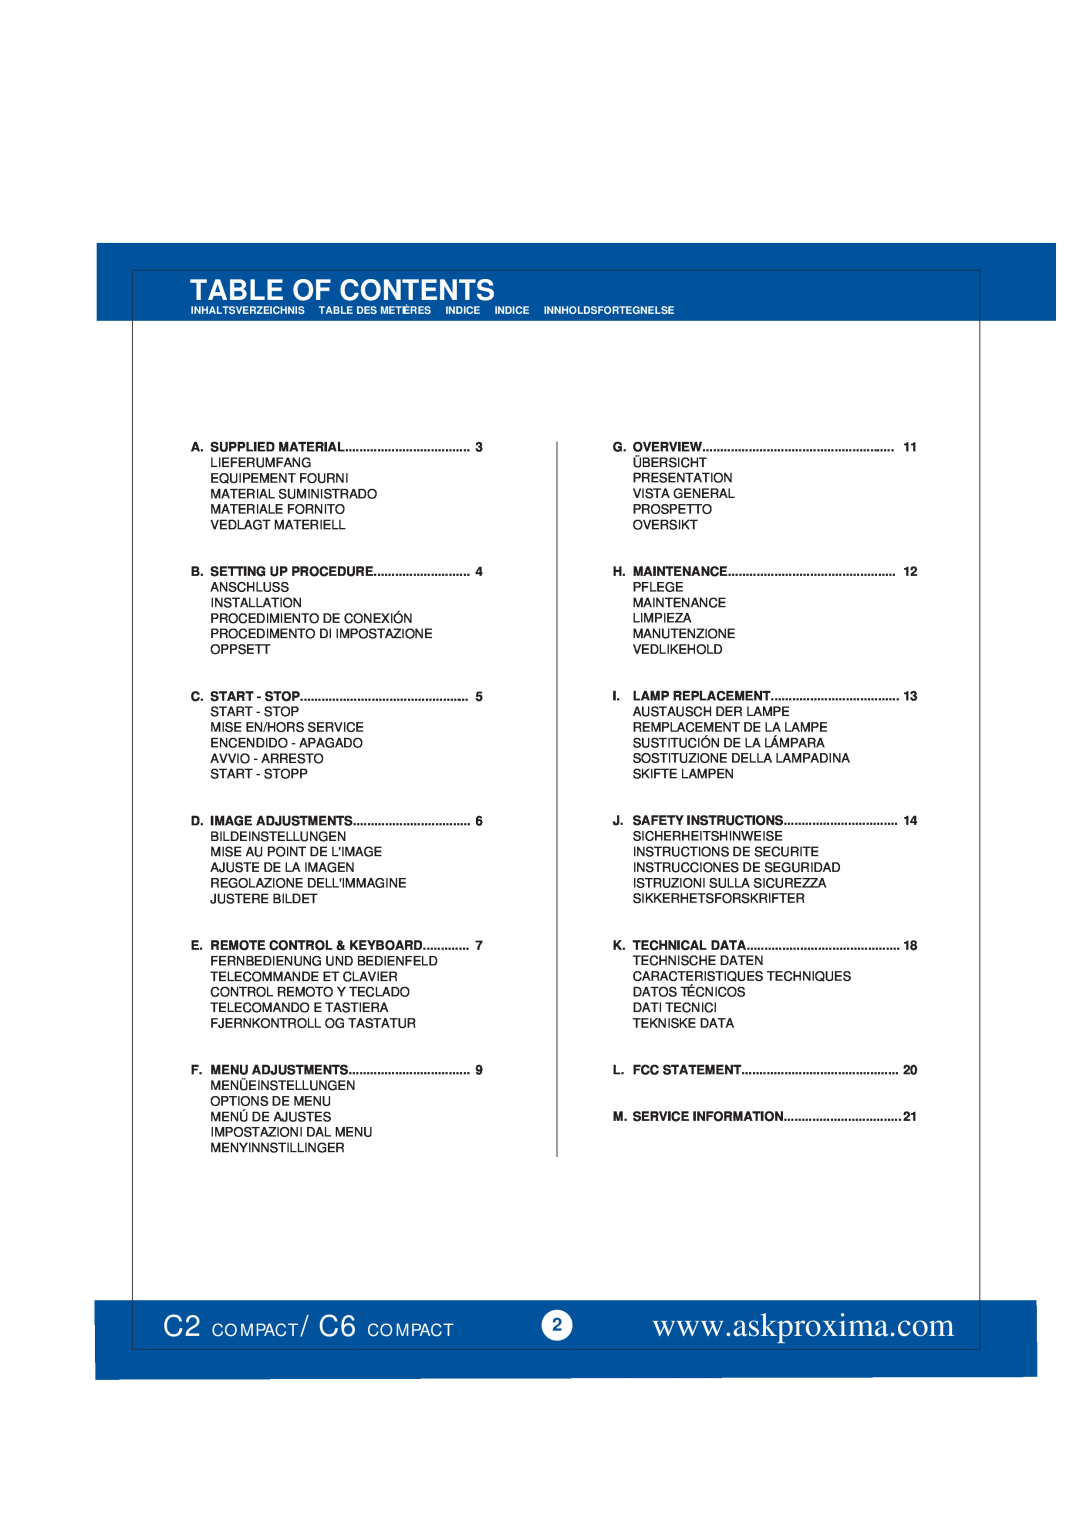 Ask Proxima manual Table Of Contents, C2 COMPACT / C6 COMPACT 